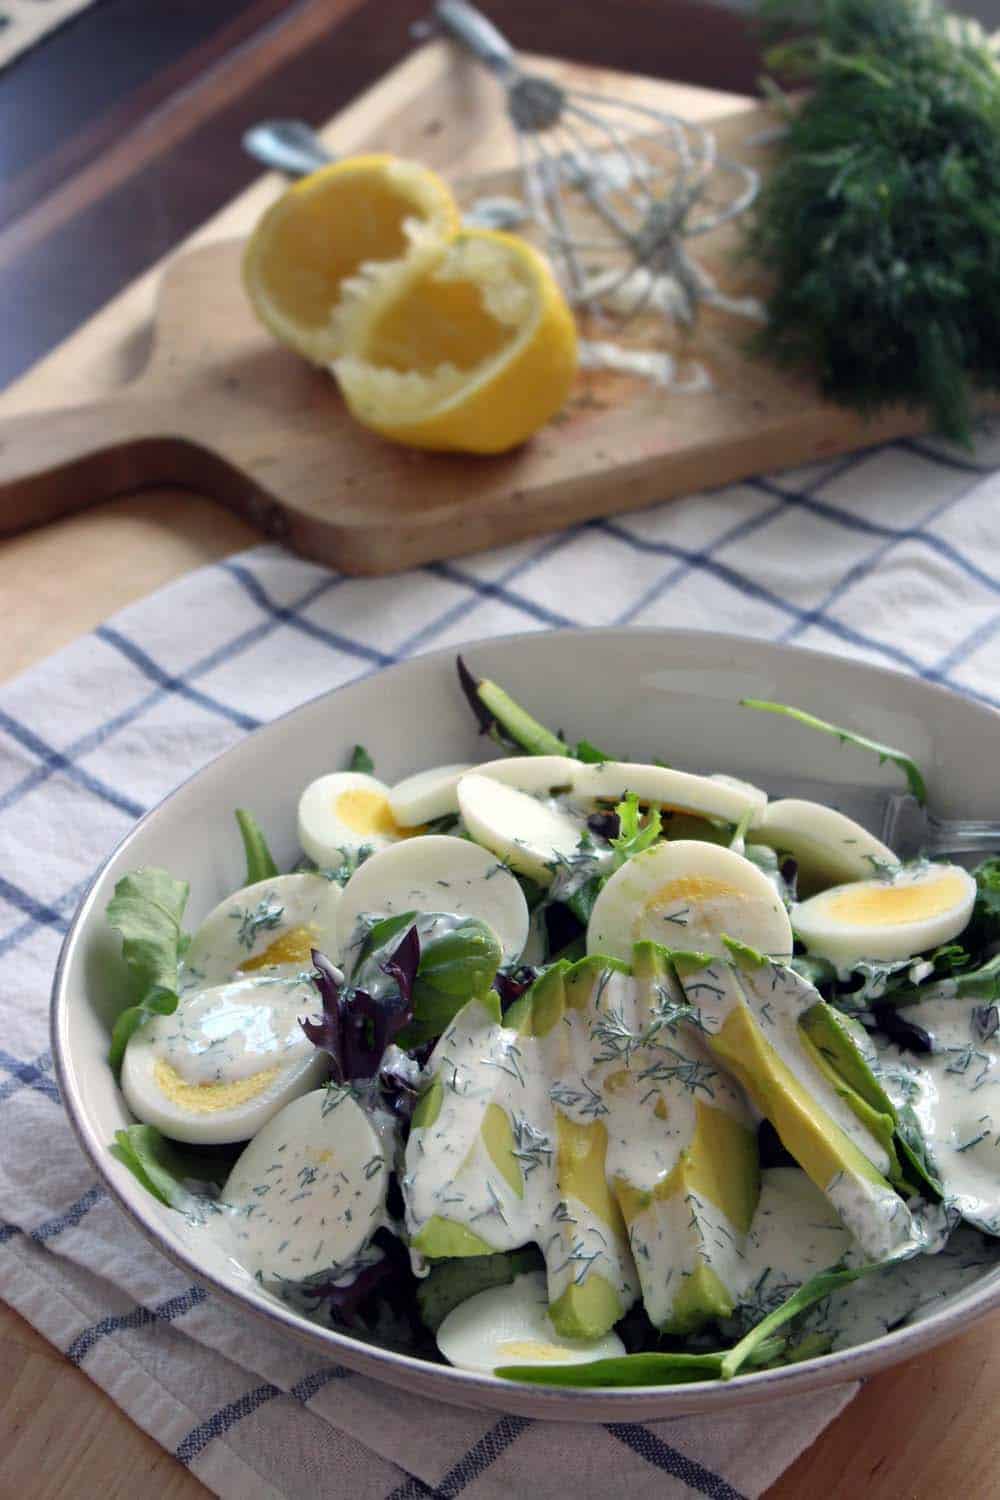 Mixed greens salad with egg and avocado, topped with creamy white dressing, in a white bowl on a blue and white checkered cloth. A wood cutting board with lemons and dill is in the background.